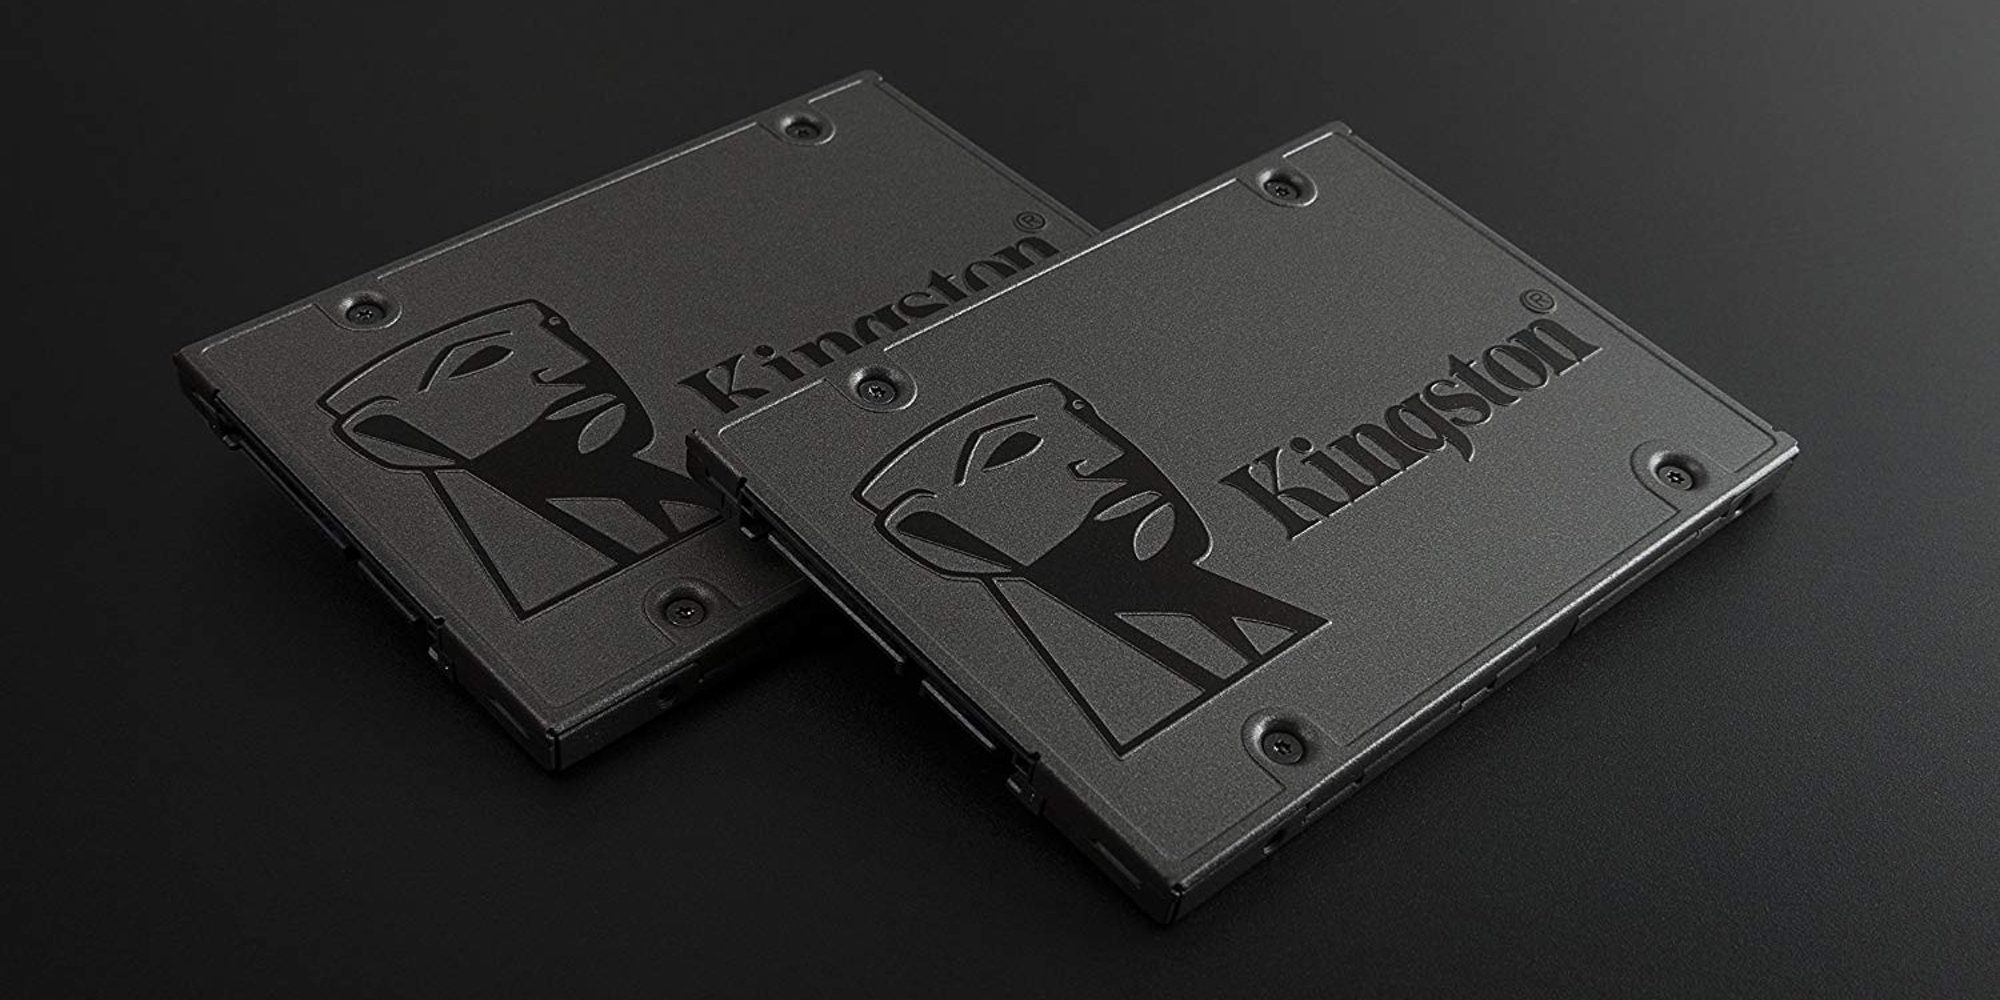 Kingston's 480GB Internal SSD falls to new 2020 Amazon low at $46, more